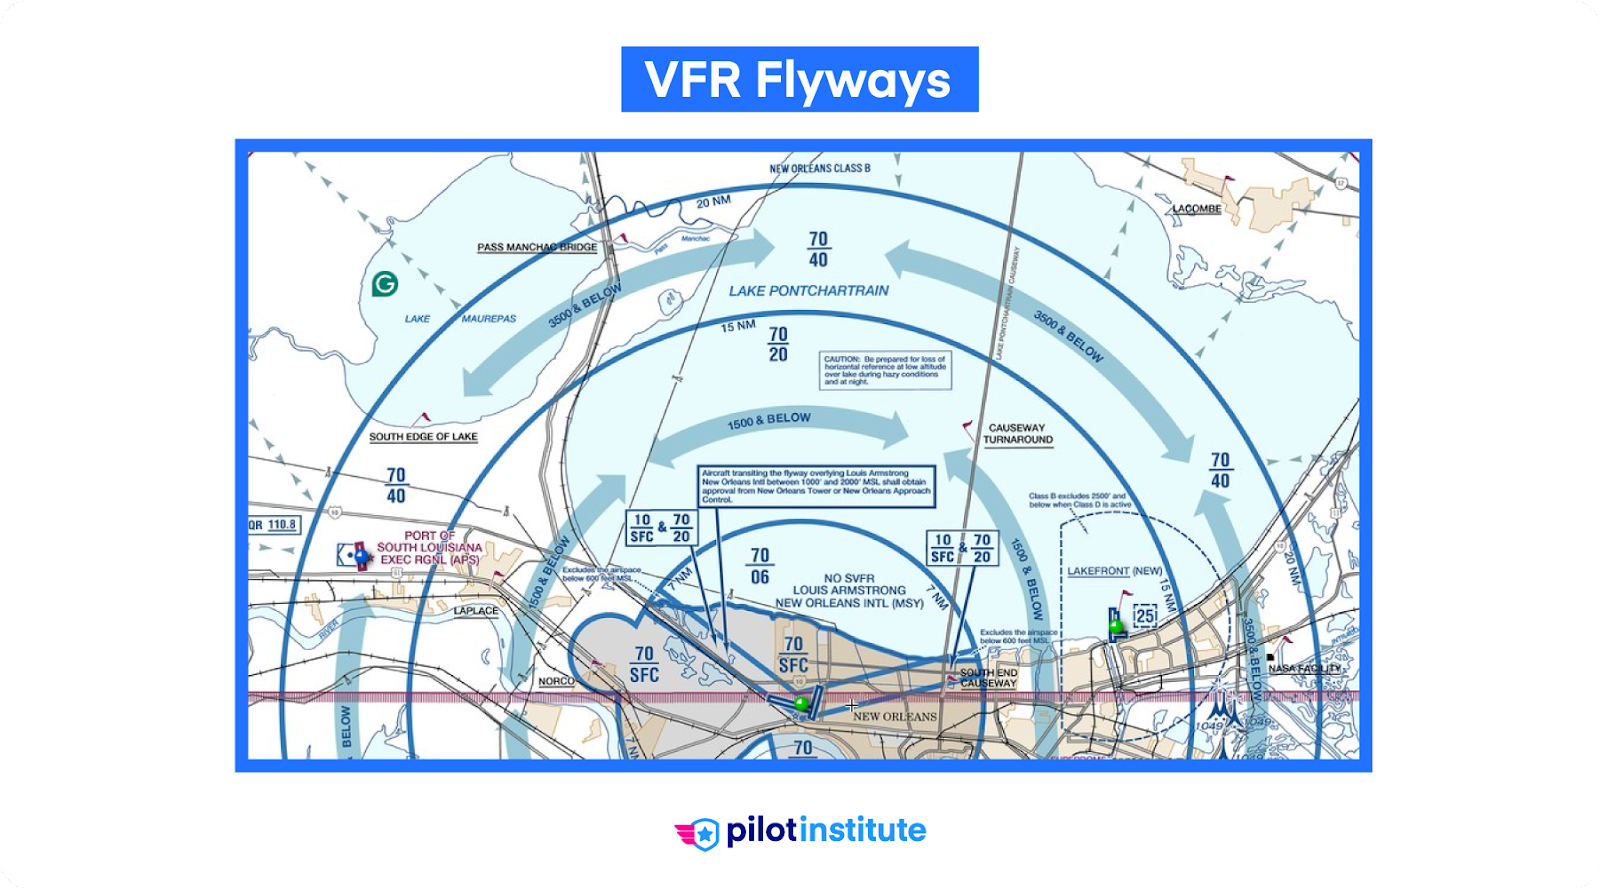 A chart showing VFR Flyways.